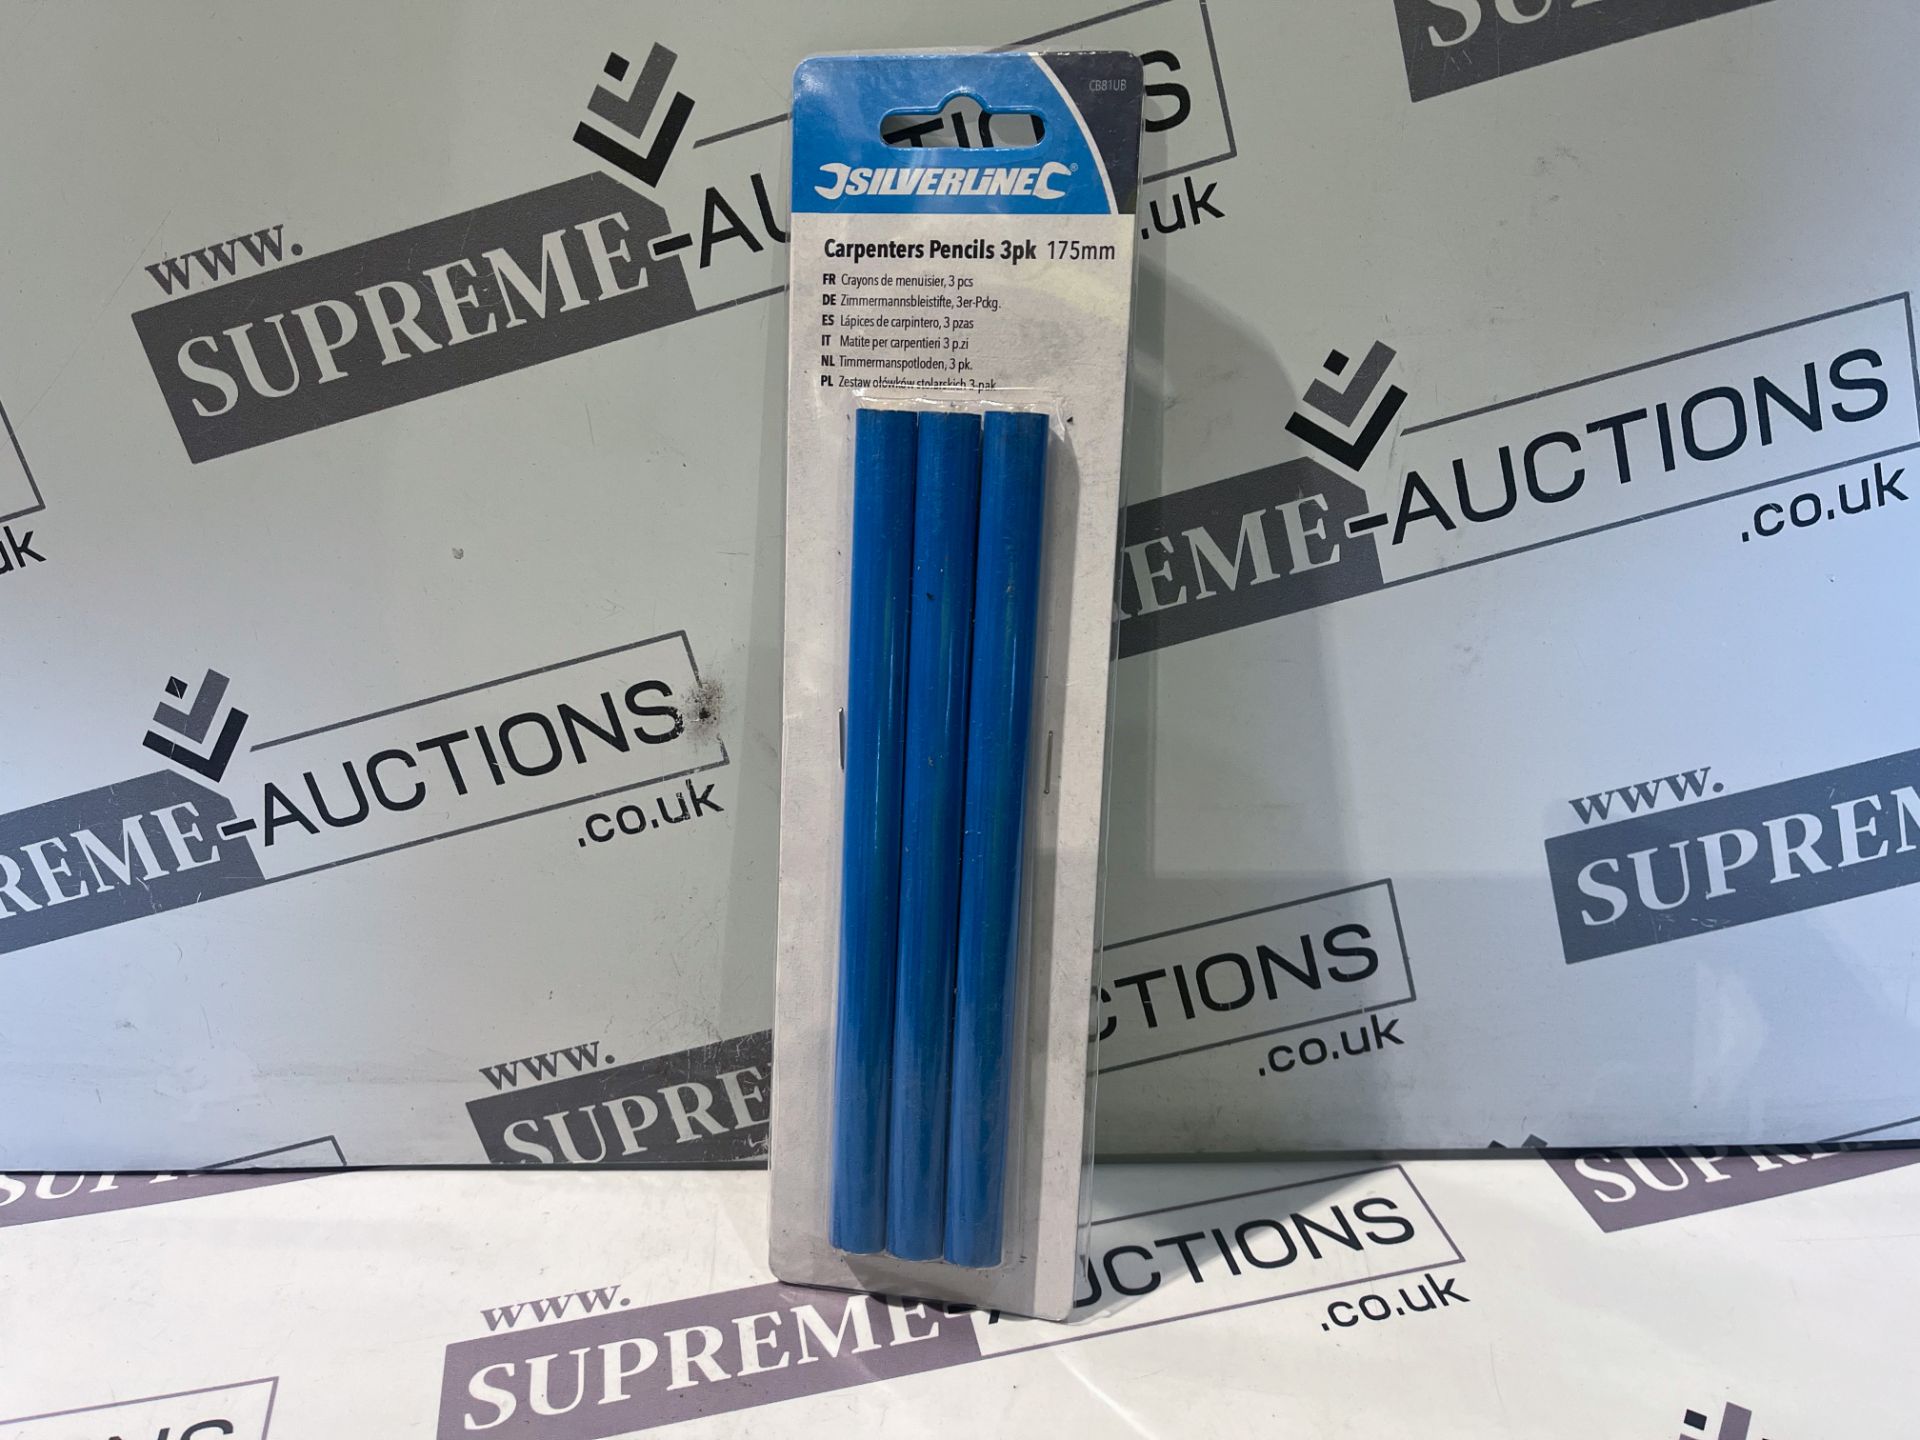 144 X BRAND NEW PACKS OF 3 SILVERLINE CARPENTERS PENCILS 175MM R11.2